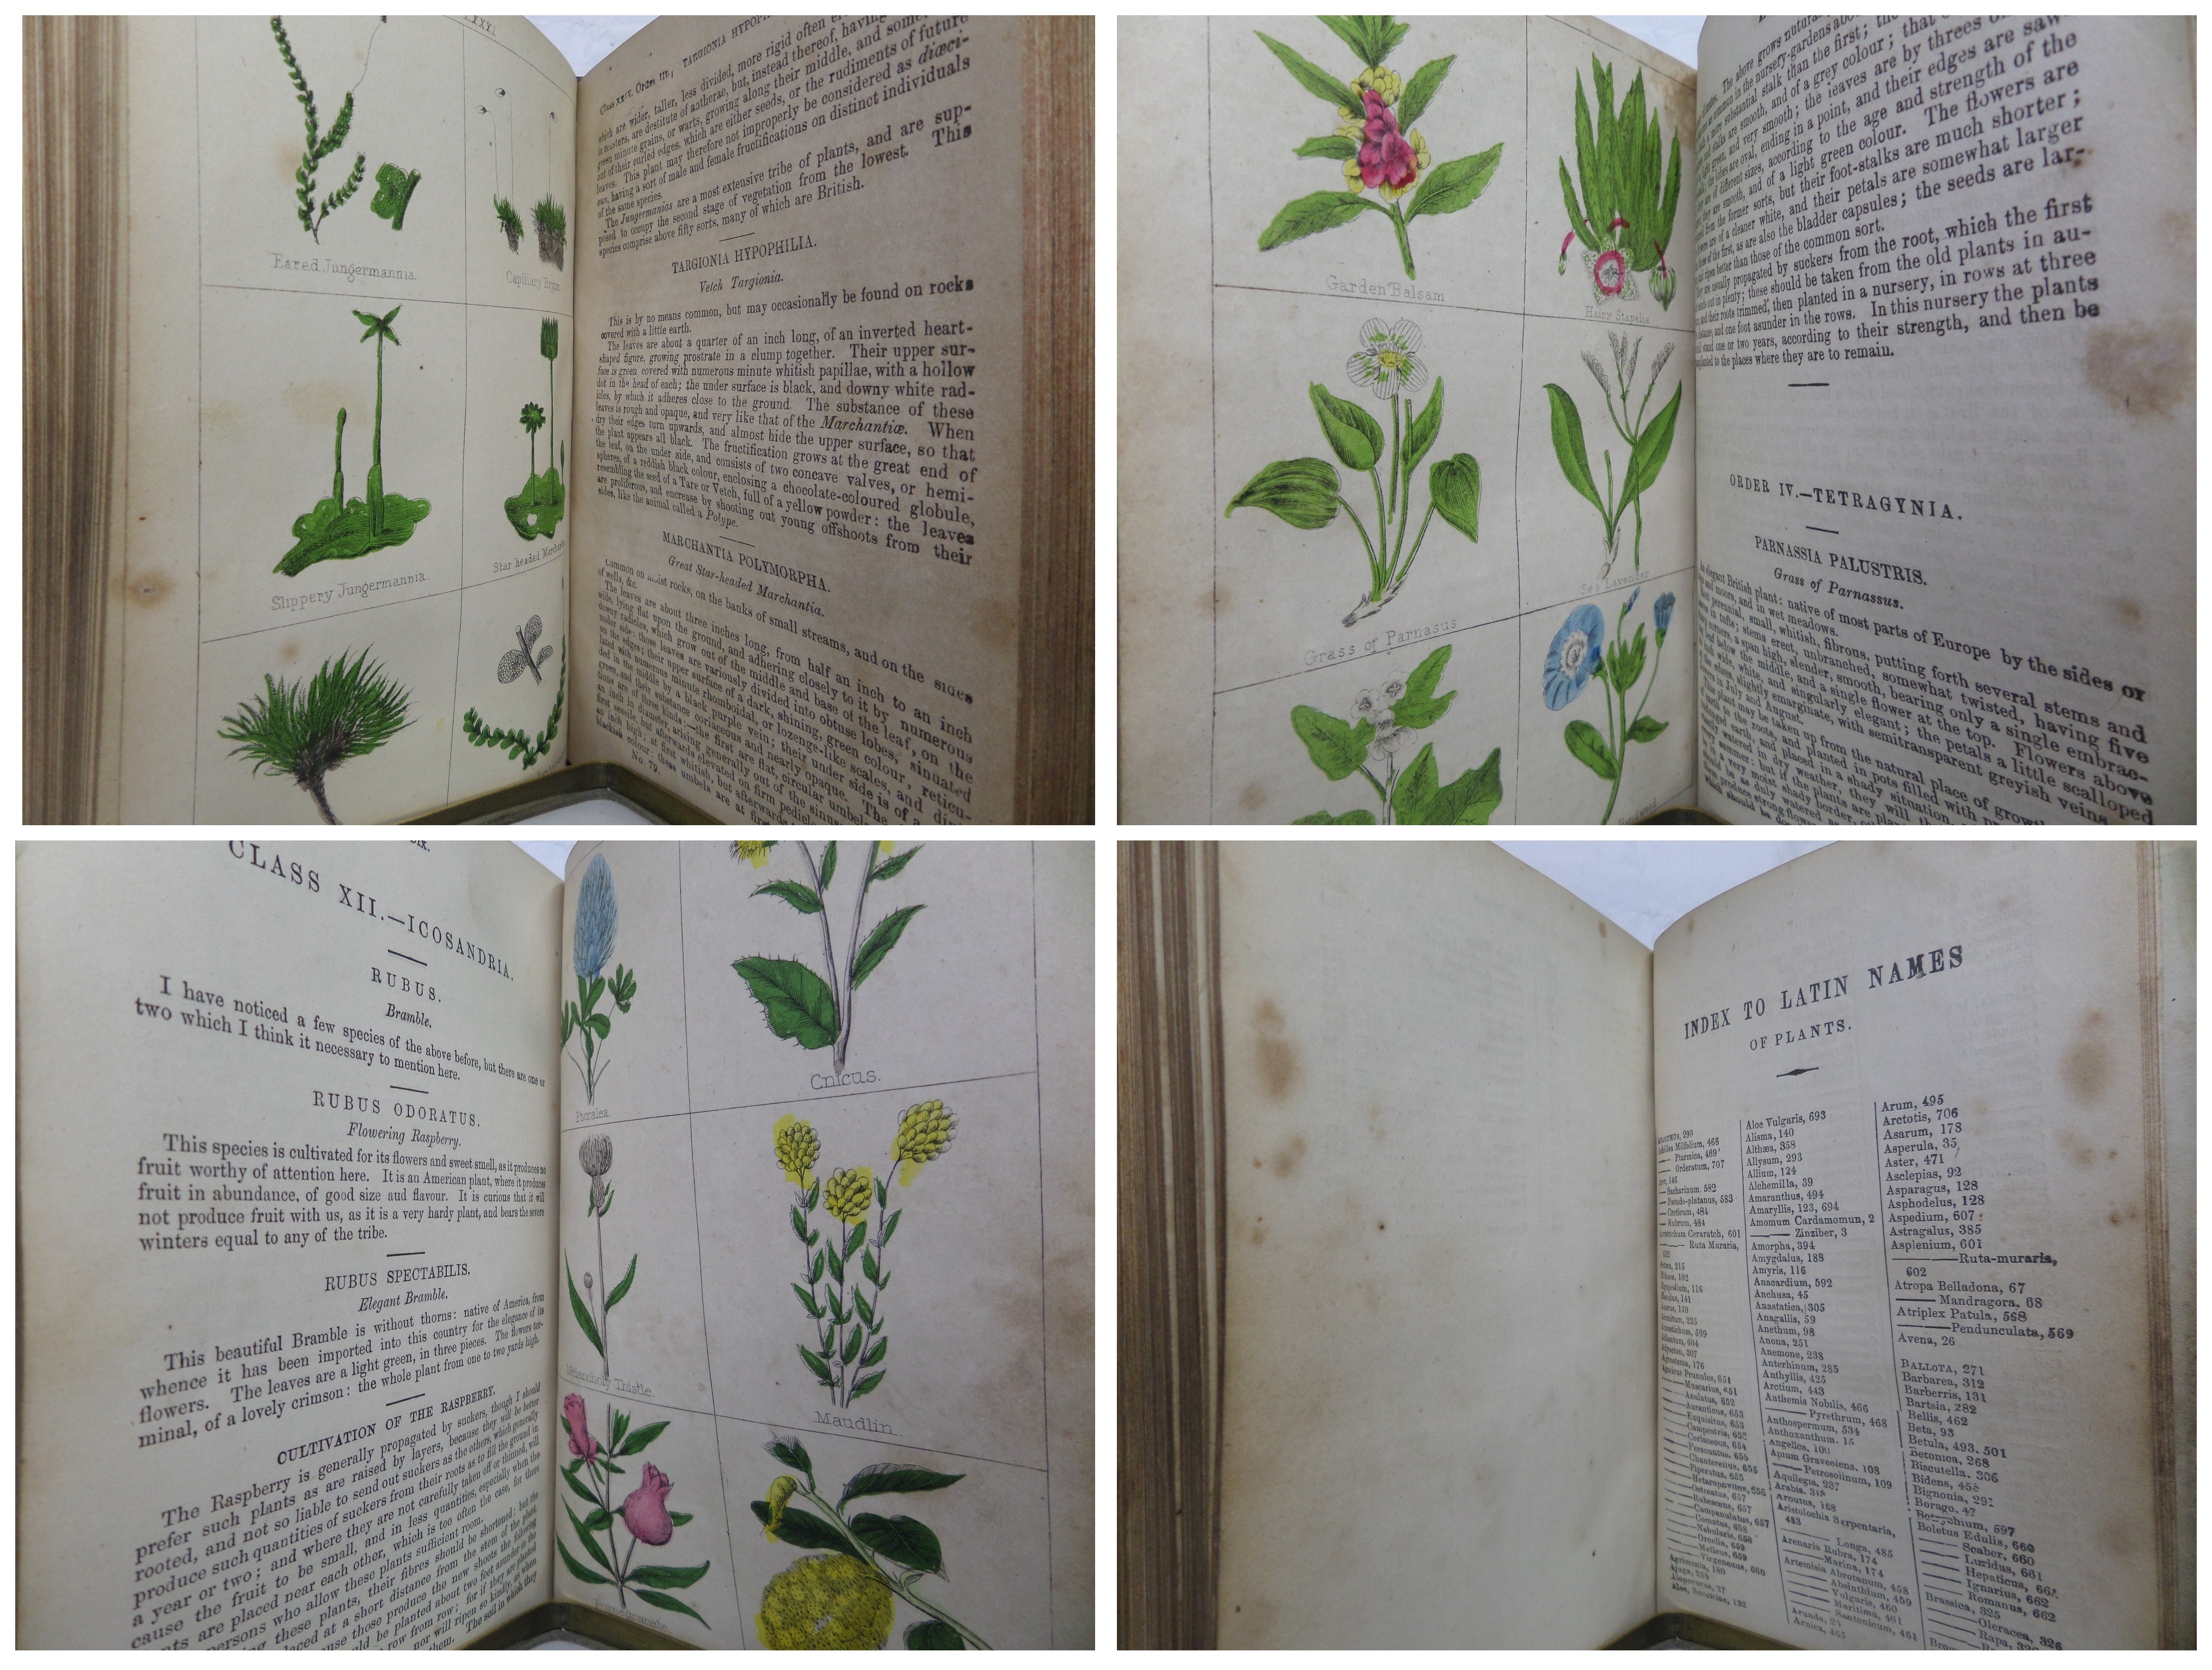 NEW CYCLOPAEDIA OF BOTANY AND COMPLETE BOOK OF HERBS BY RICHARD BROOK IN TWO VOLUMES C.1854